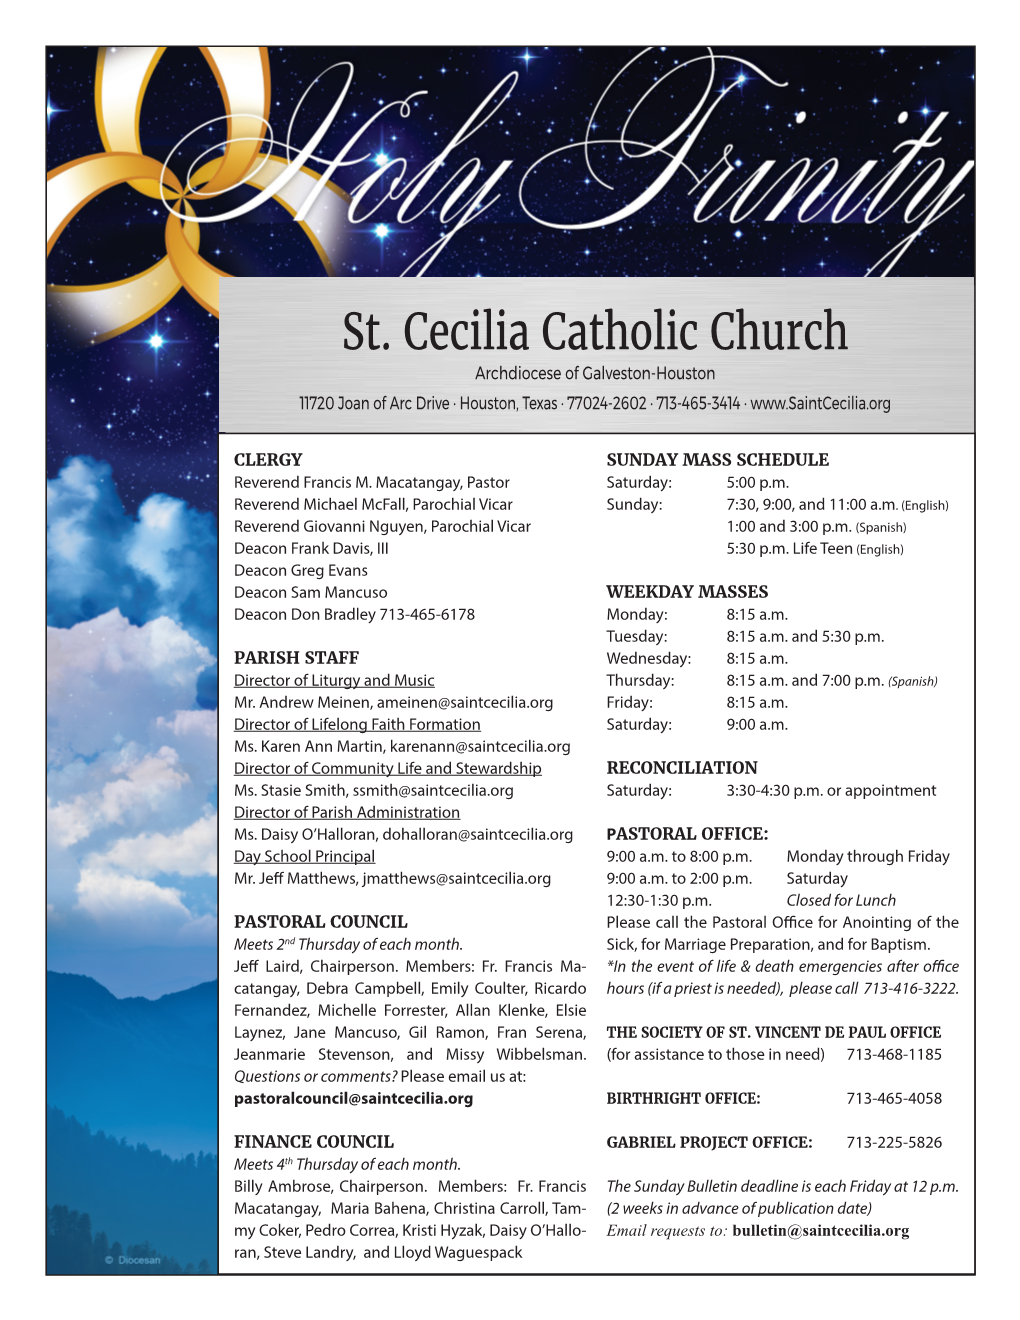 St. Cecilia Catholic Church Has Purchased a Gift for You!